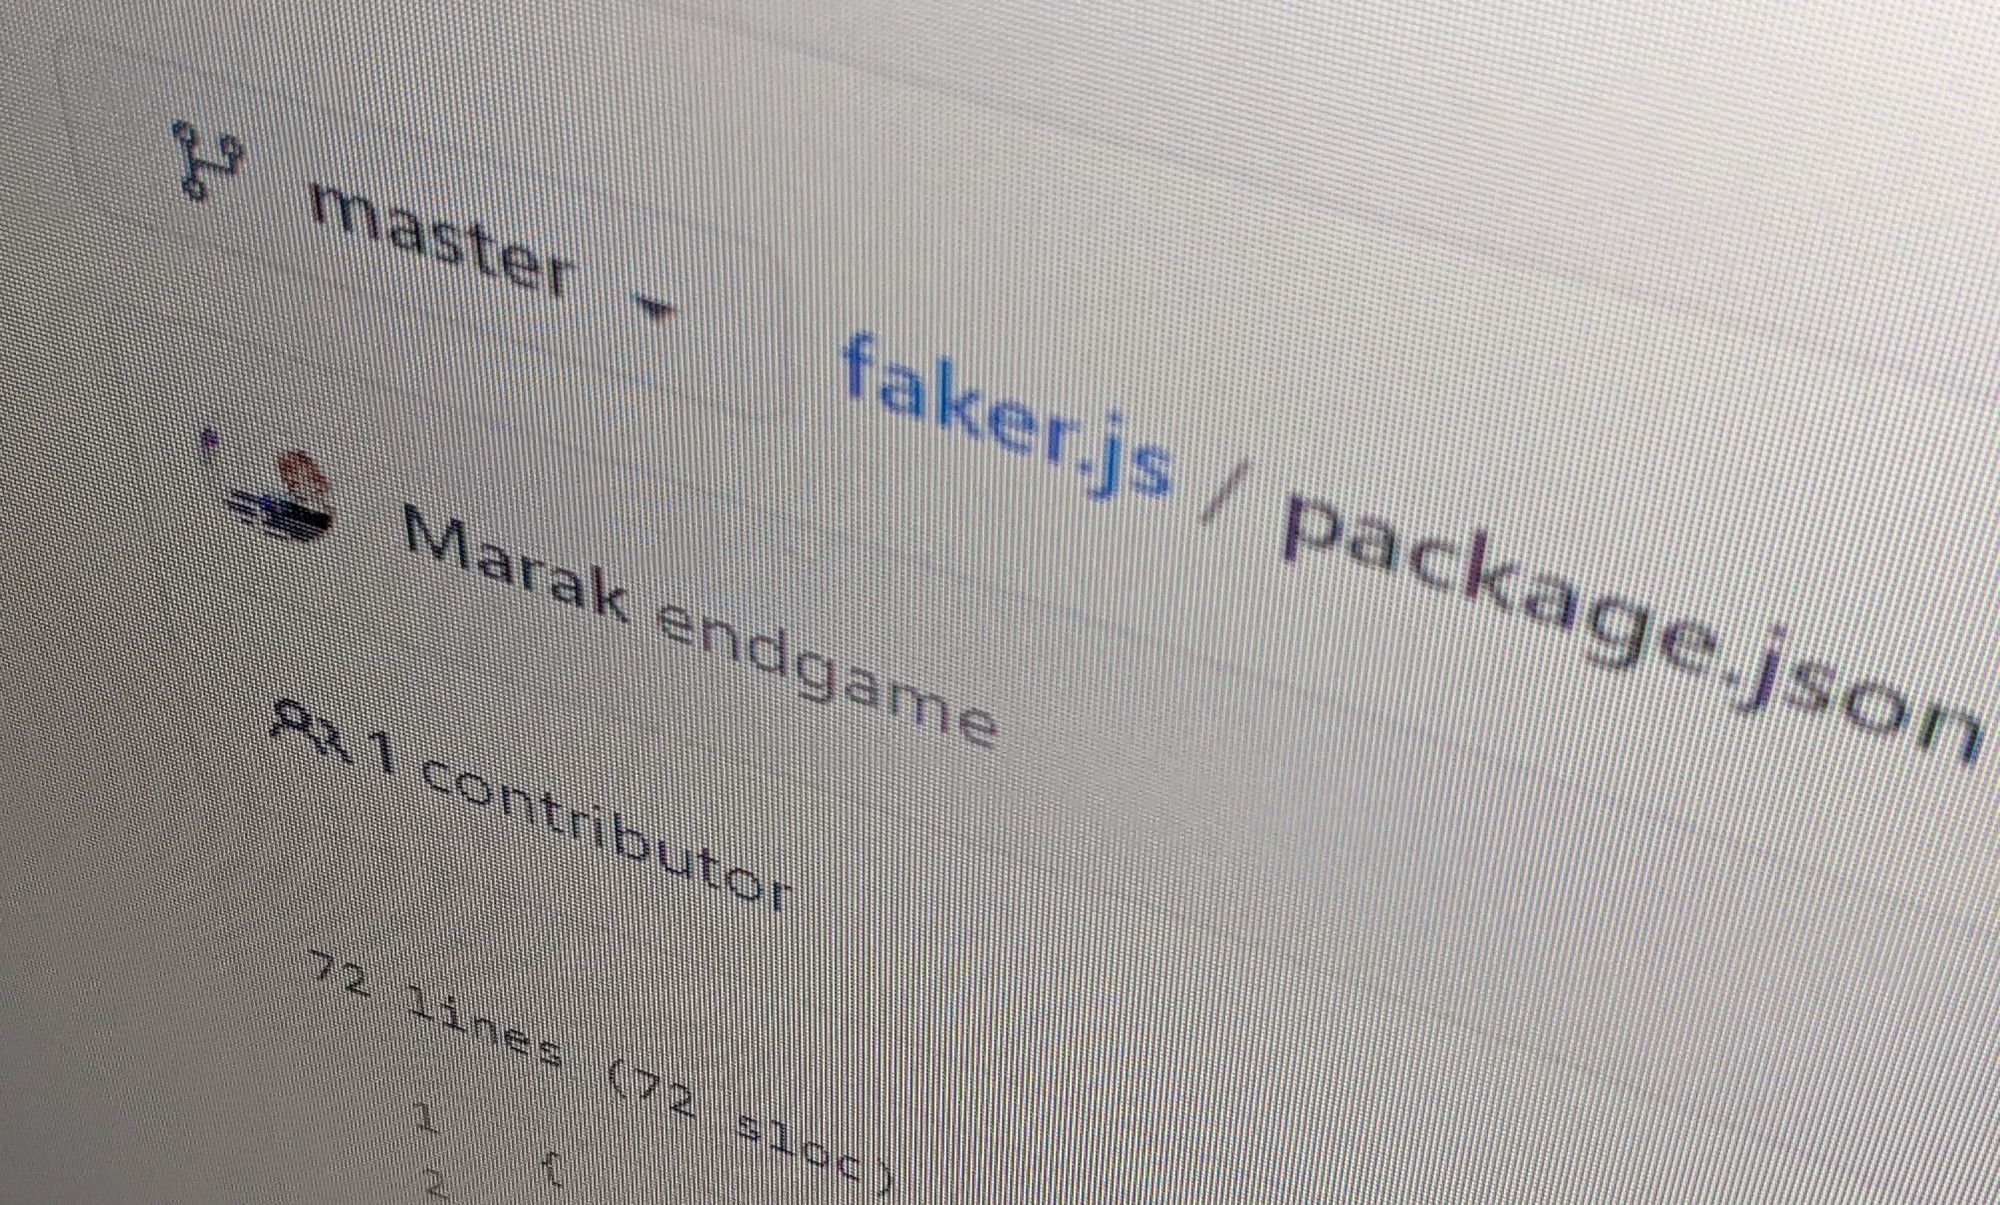 What happened to Faker.js and how to secure your projects